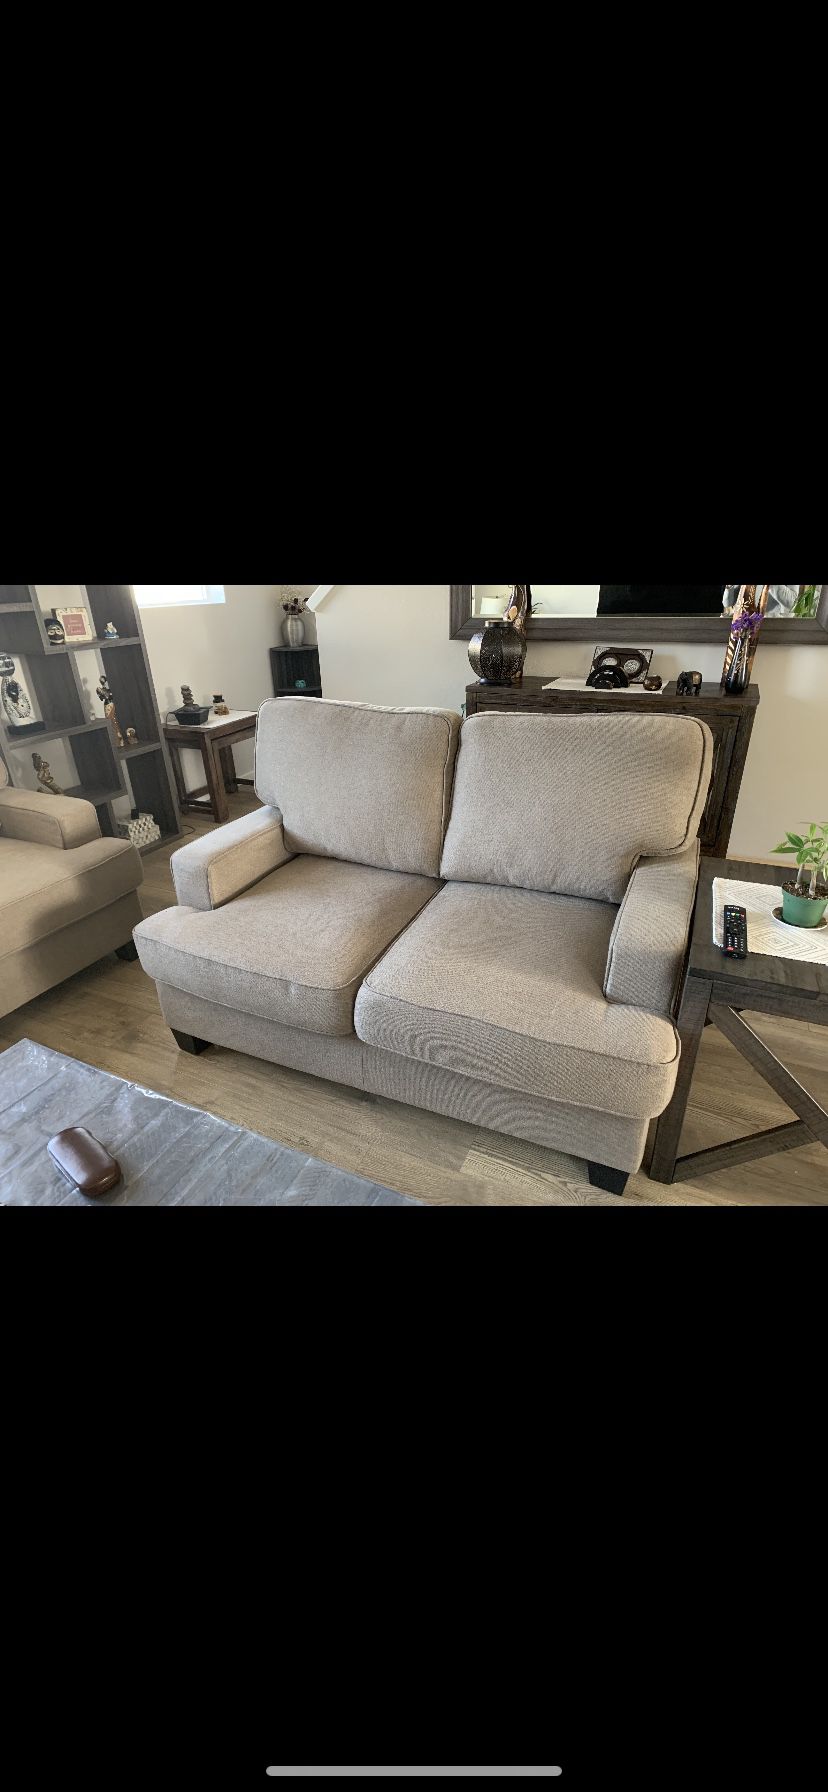 Sofa+Loveseat( Both For $100 Need Them Gone Today )